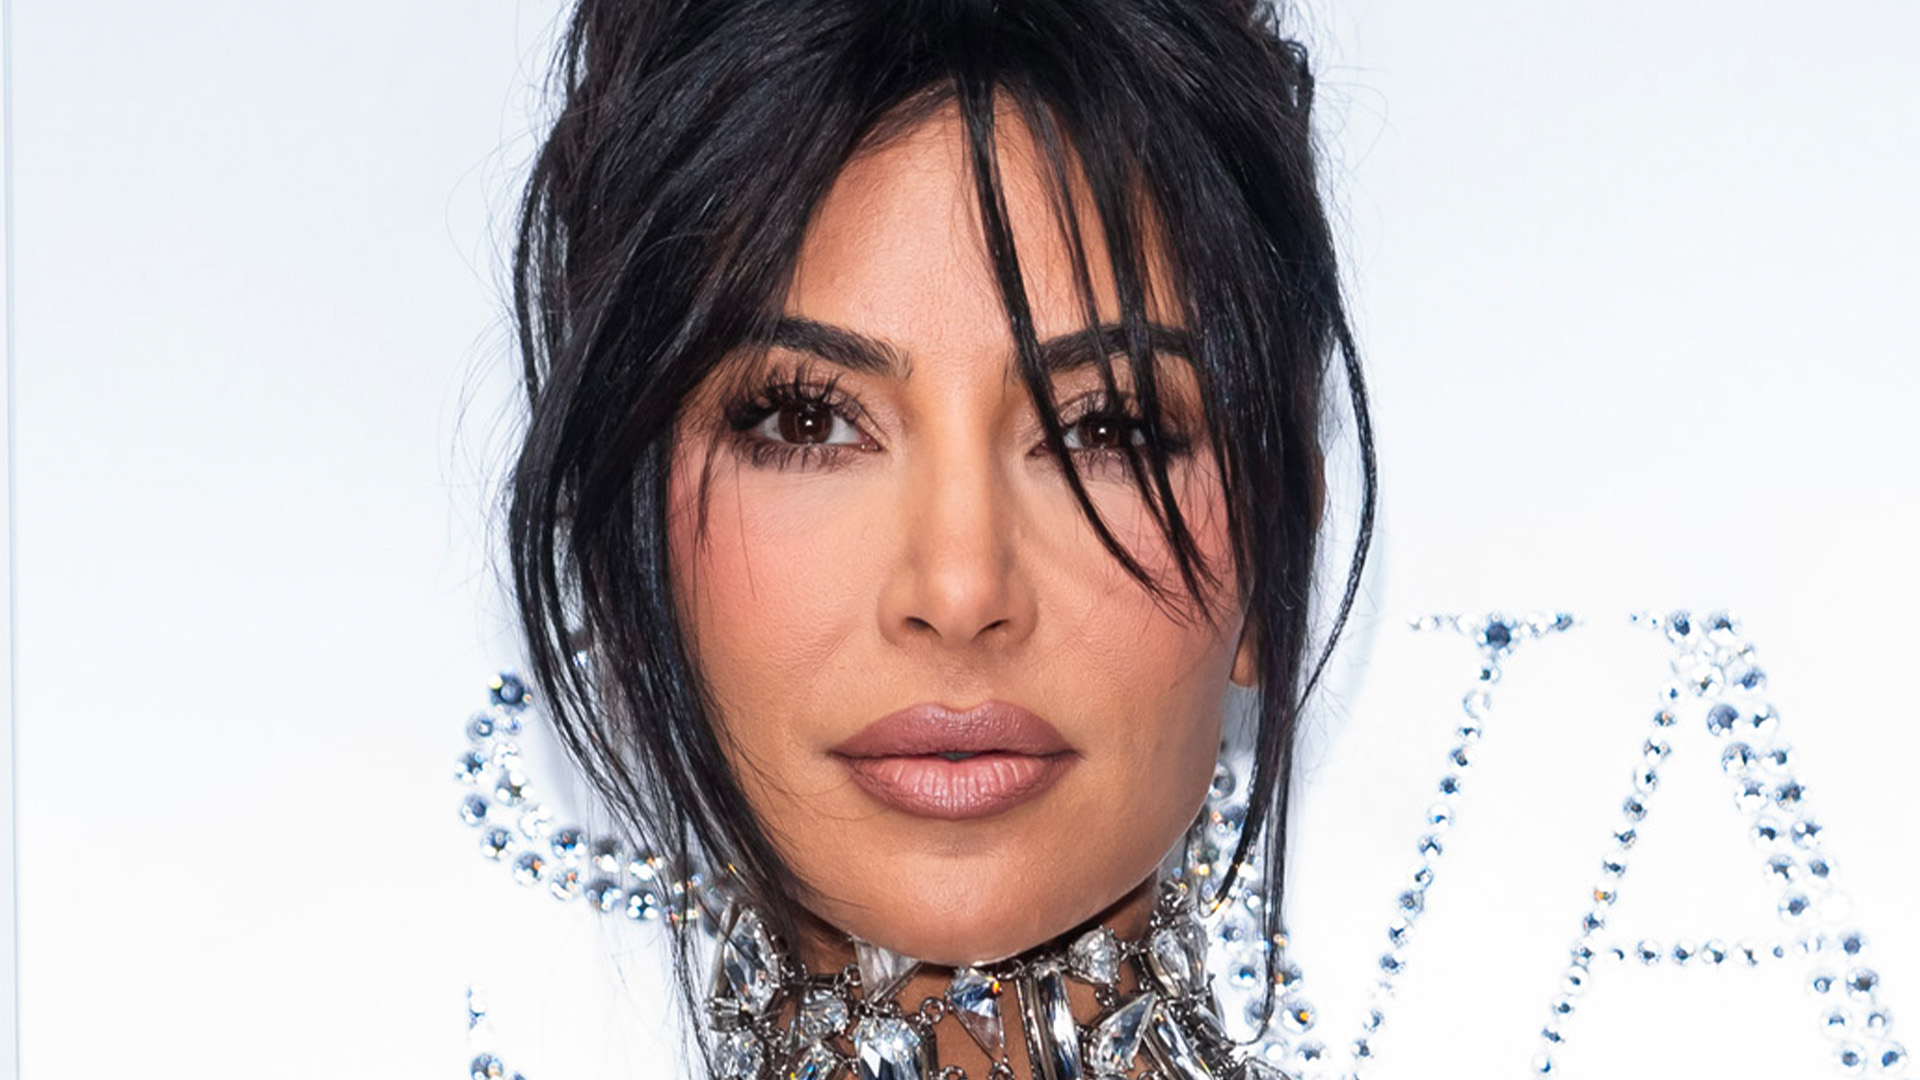 Kim Kardashian fans question ‘what are those lumps’ in unedited photos